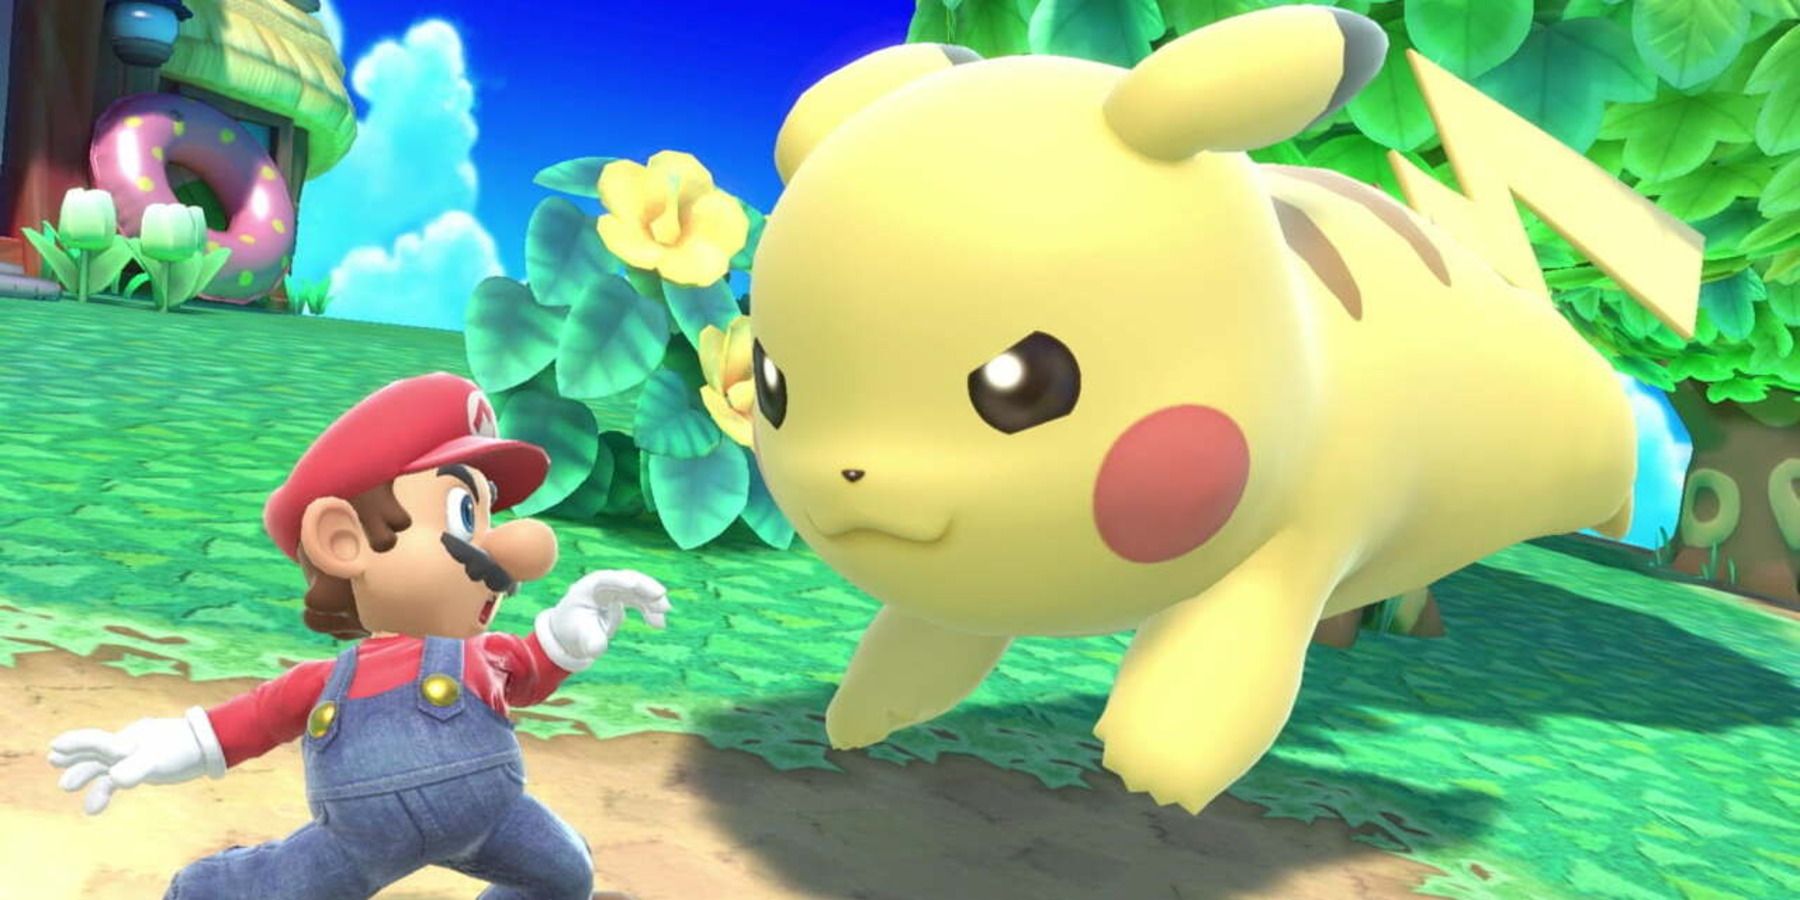 An enlarged Pikachu running towards a shocked Mario in Super Smash Bros. Ultimate.